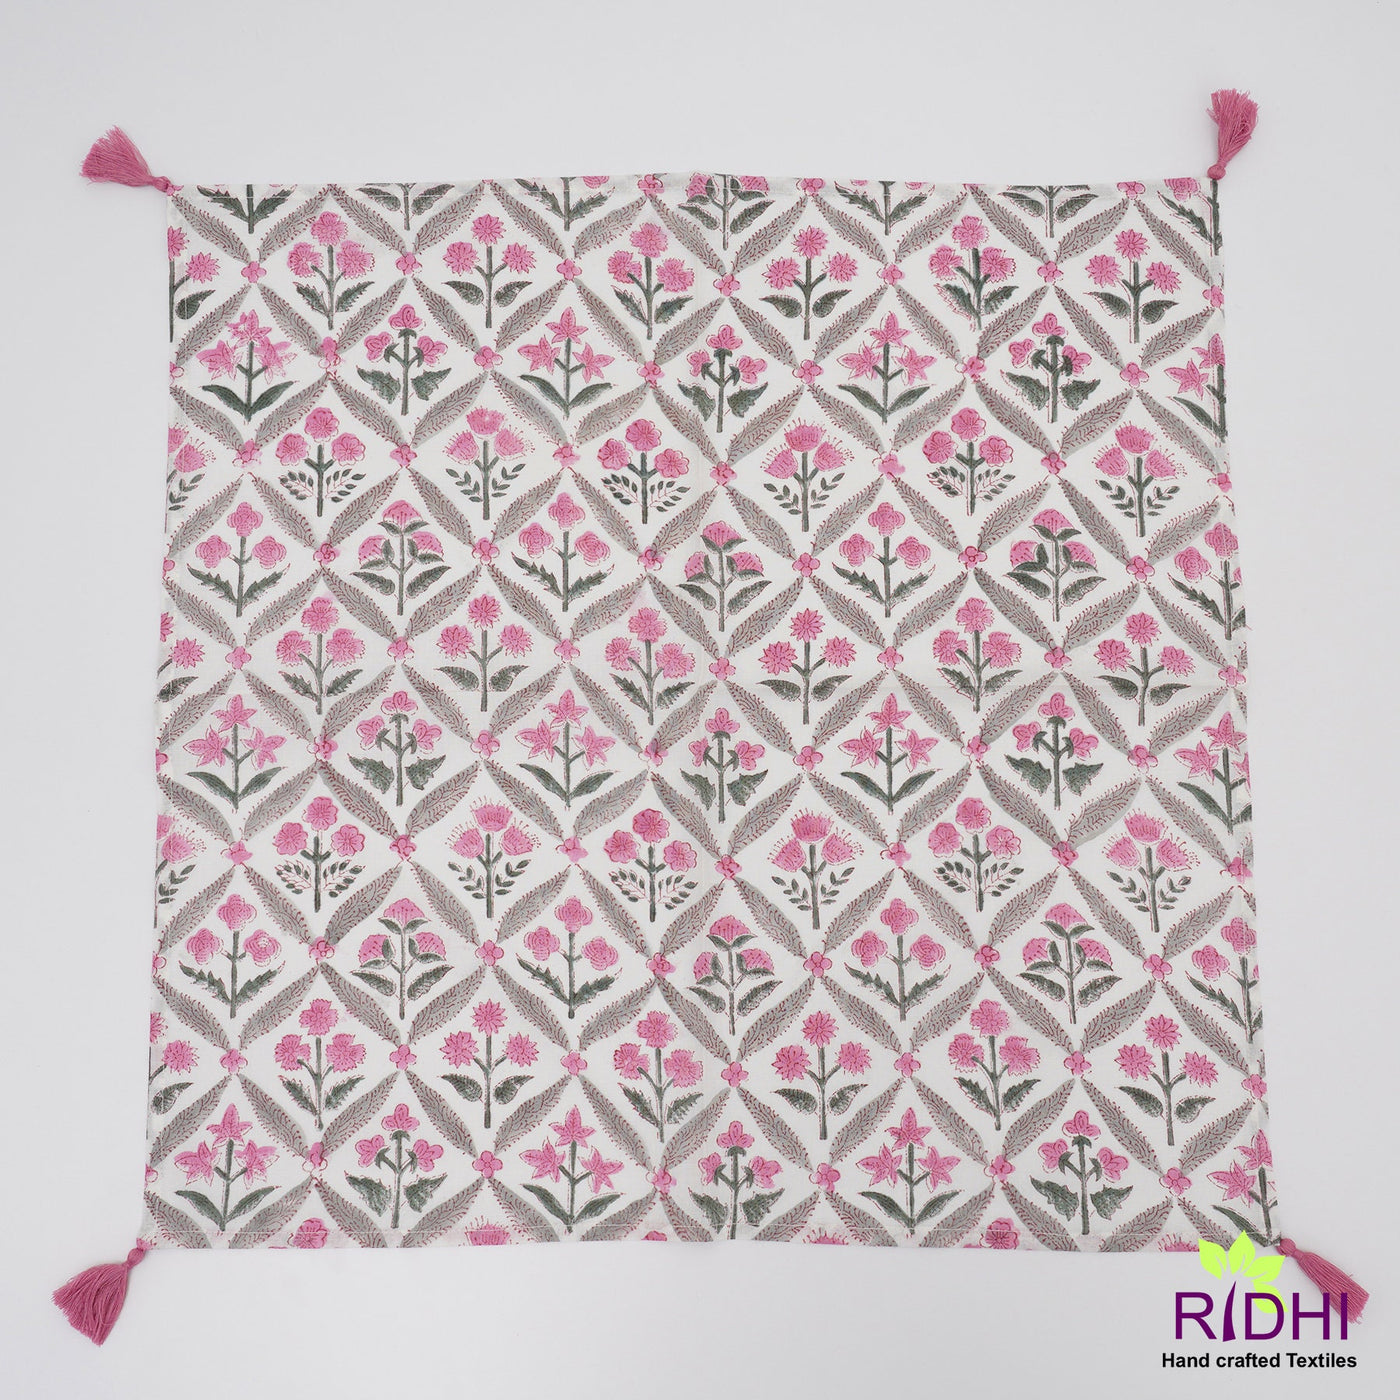 Fabricrush Watermelon Pink, Artichoke and Seaweed Green Indian Floral Hand Block Printed Cloth Napkins, 18X18"- Cocktail Napkins, 20X20"- Dinner Napkins